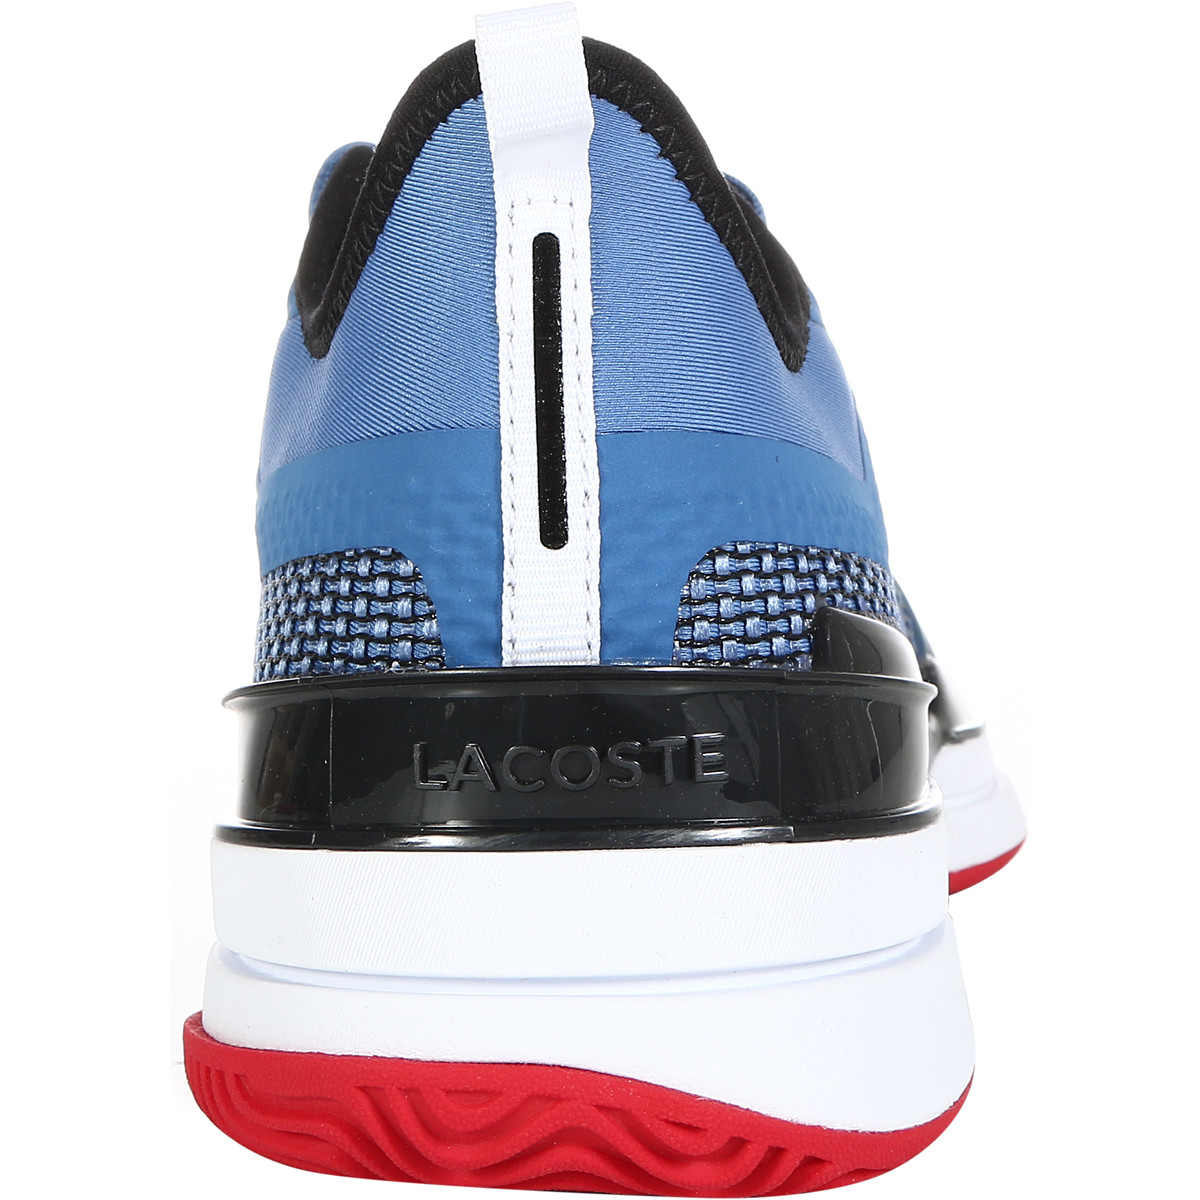 Chaussures Lacoste AG-LT Ultra 21 Terre Battue Homme Blanc/Rouge